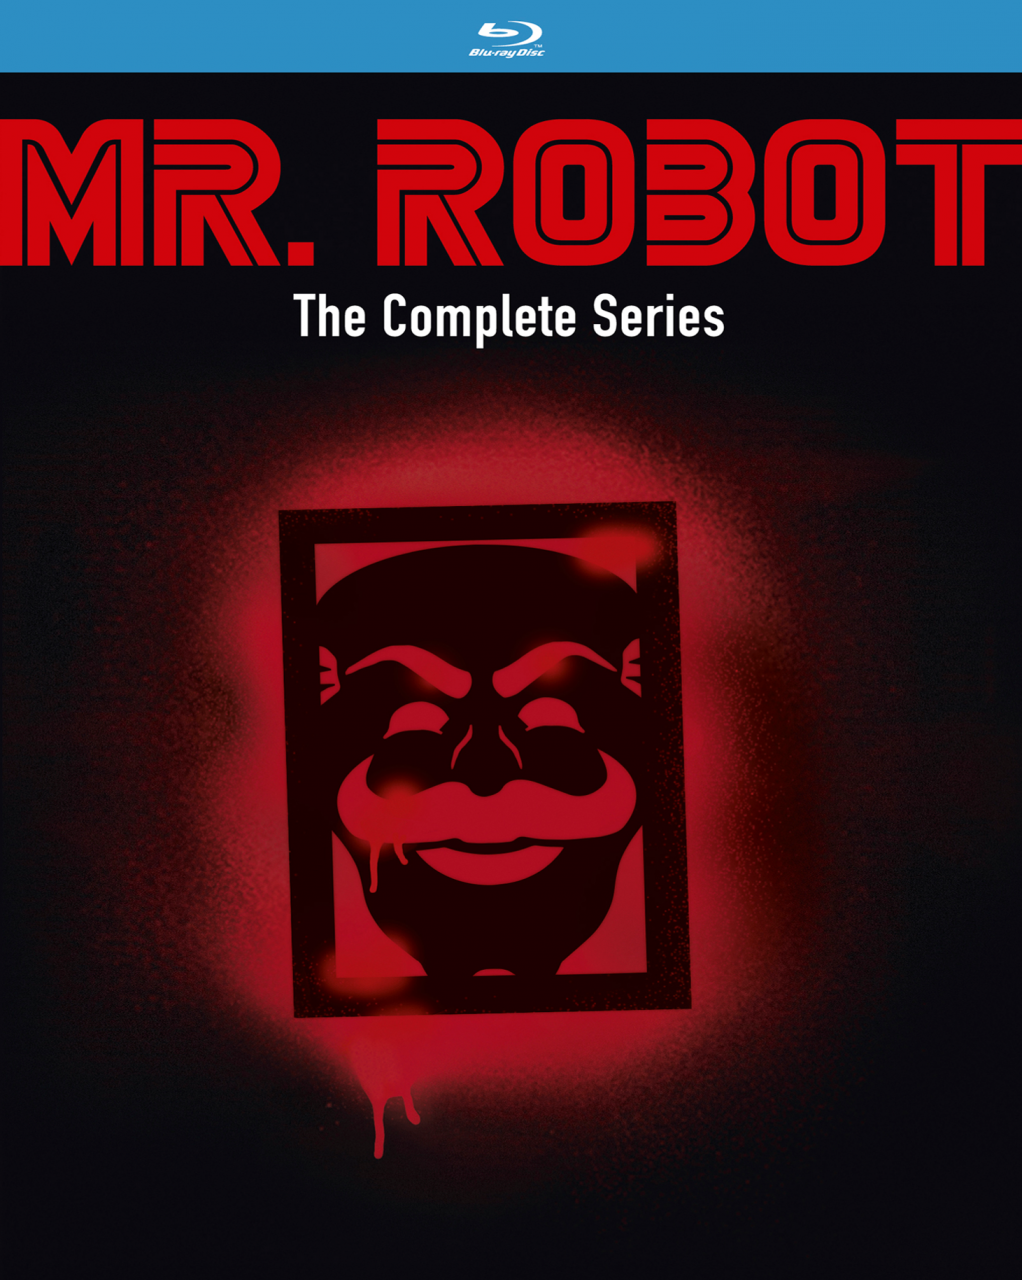 Mr. Robot: The Complete Series Blu-Ray Combo Pack cover (Universal Pictures Home Entertainment)